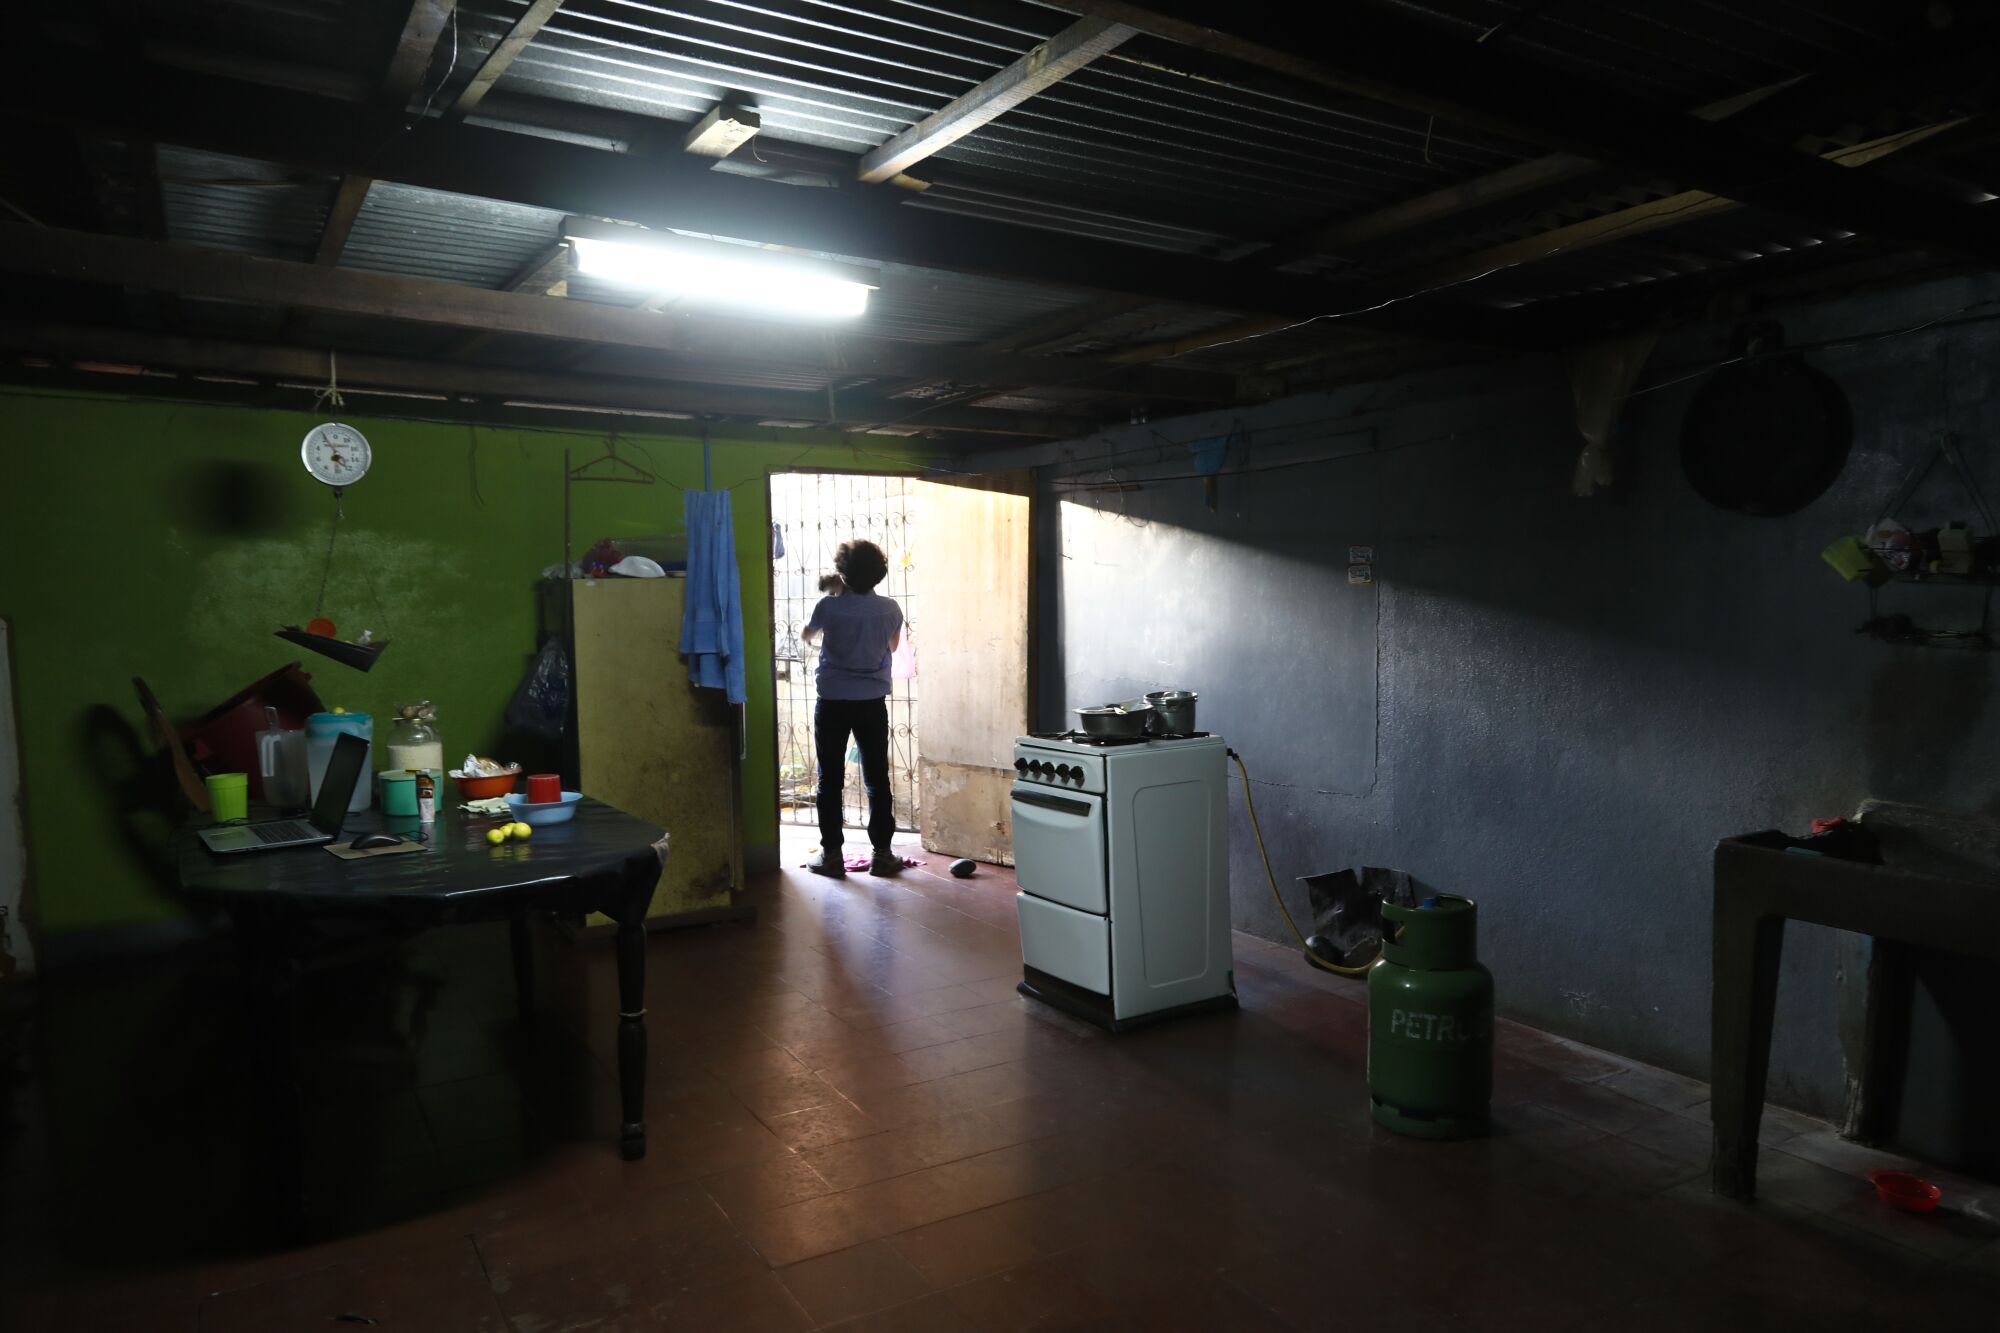 A resident living near a university in Managua recalls how the government deployed tear gas against protesters, and how one canister filled his kitchen with the gas, forcing him and his family to shelter in a bedroom with a wet towel stuffed under the door.